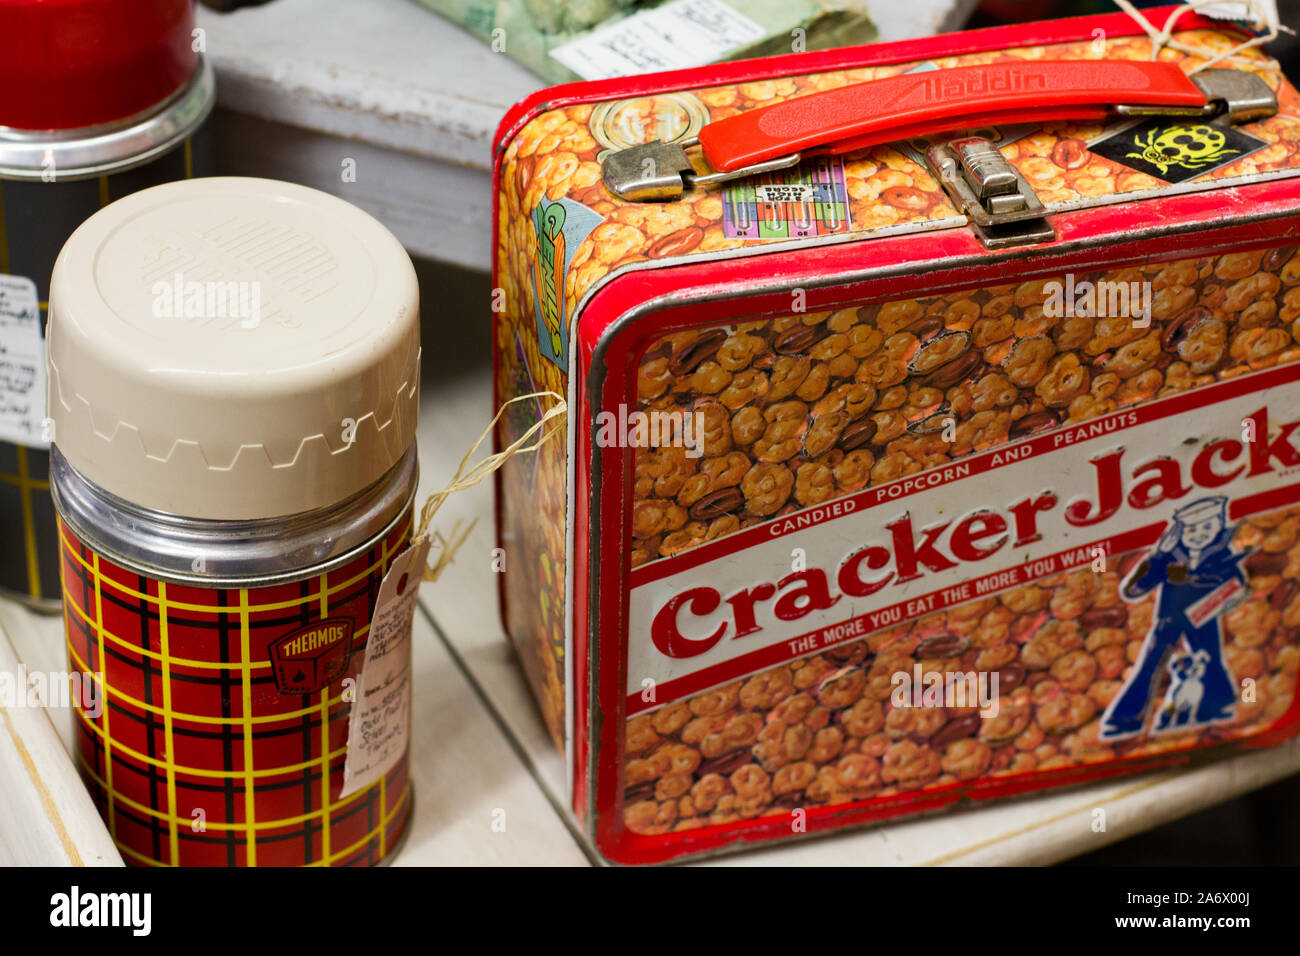 https://c8.alamy.com/comp/2A6X00J/thorp-washington-usa-august-12-2018-vintage-cracker-jack-lunch-box-and-thermos-for-sale-in-an-antique-shop-and-fruit-stand-near-ellensburg-2A6X00J.jpg